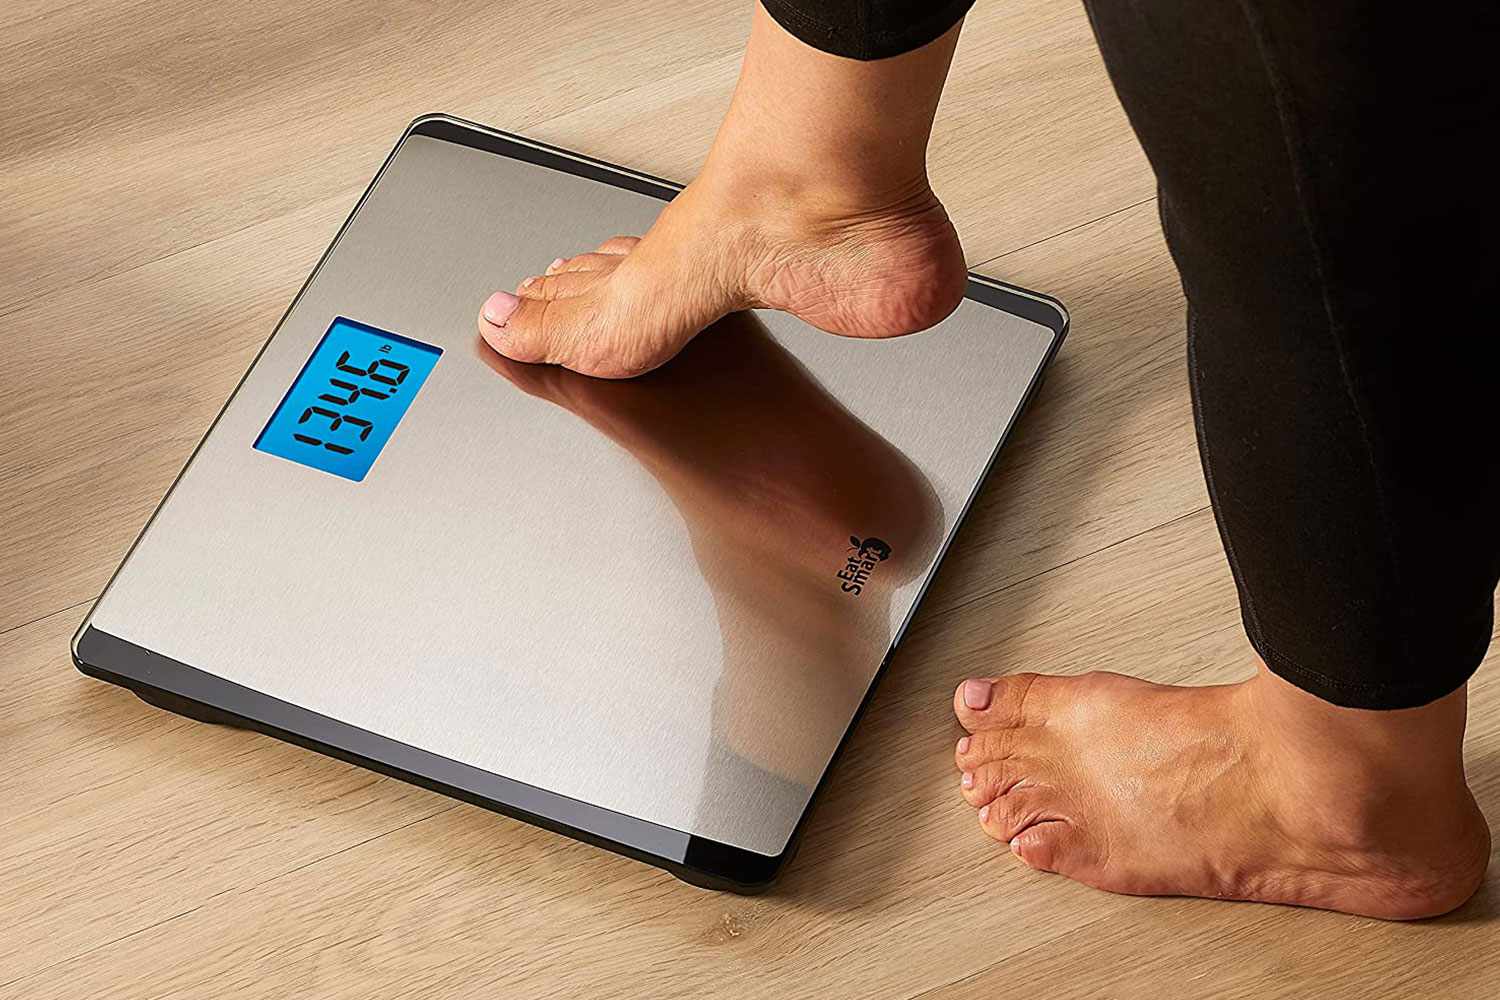 10 Best Body Weight Scale